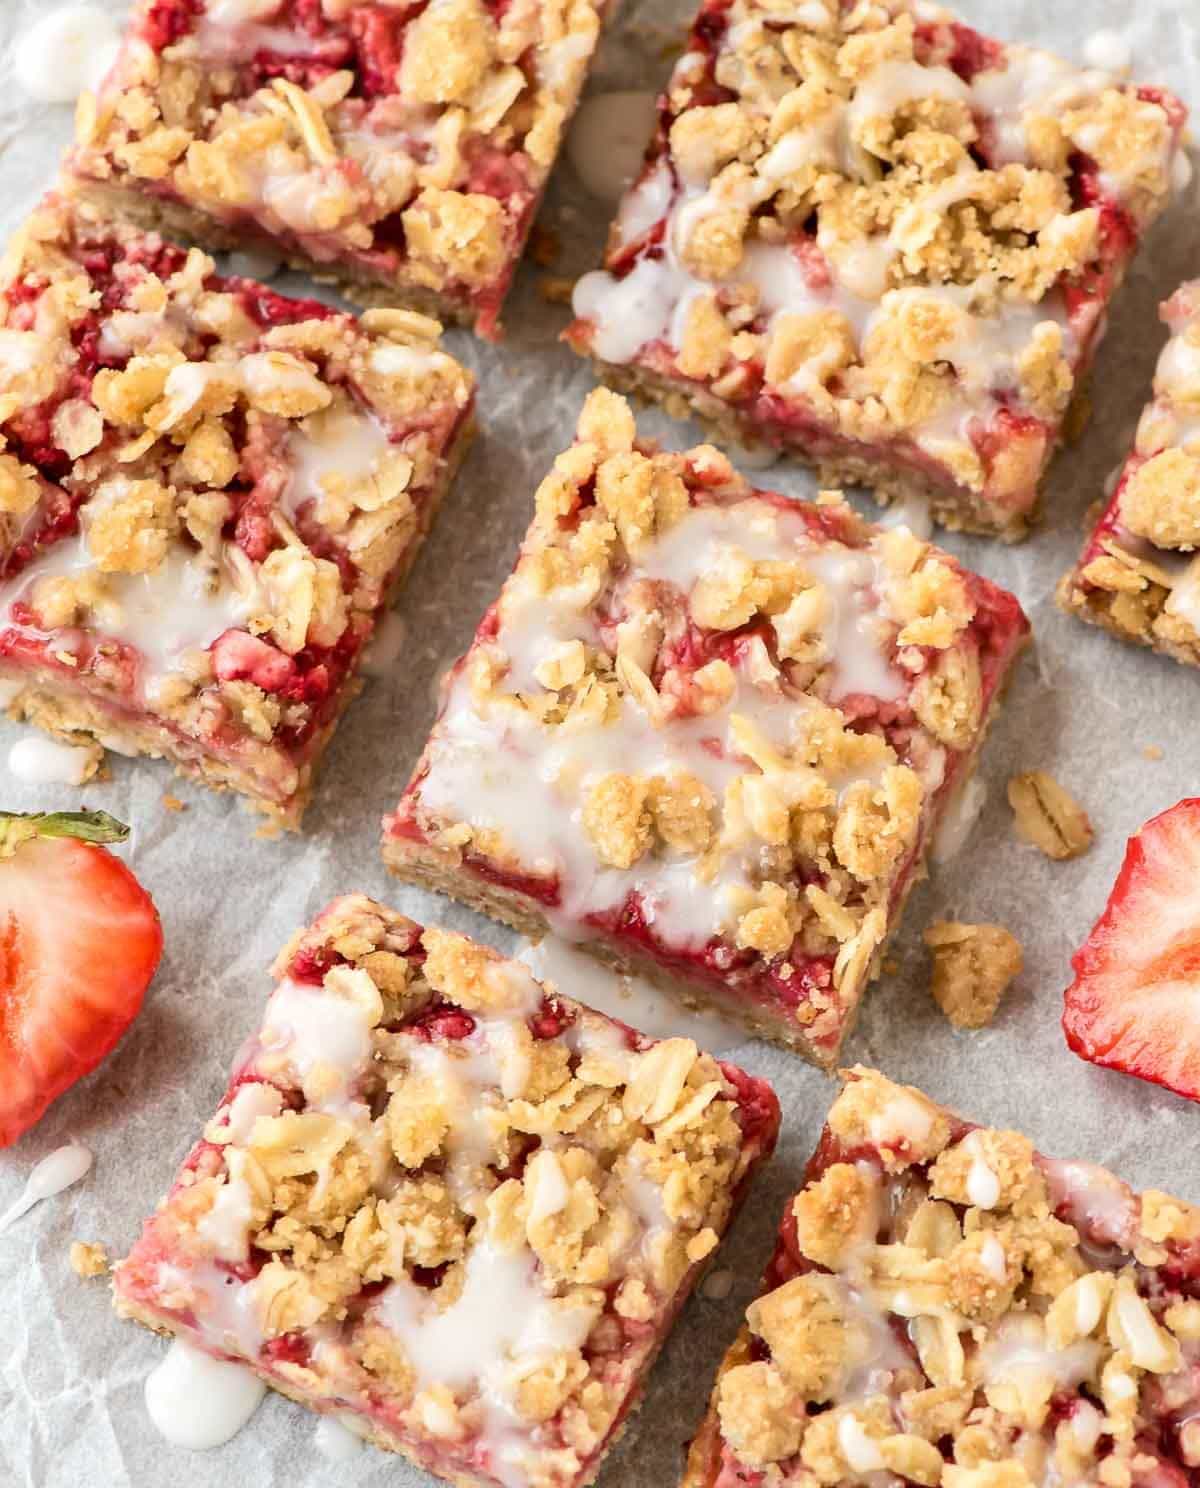 These are the easiest and best Strawberry Oatmeal Bars! Made in one bowl with a buttery crumb topping, sweet fresh strawberry filling, and vanilla glaze. Recipe uses 100% whole grains, so they are healthy enough for a snack but sweet enough for dessert! @wellplated